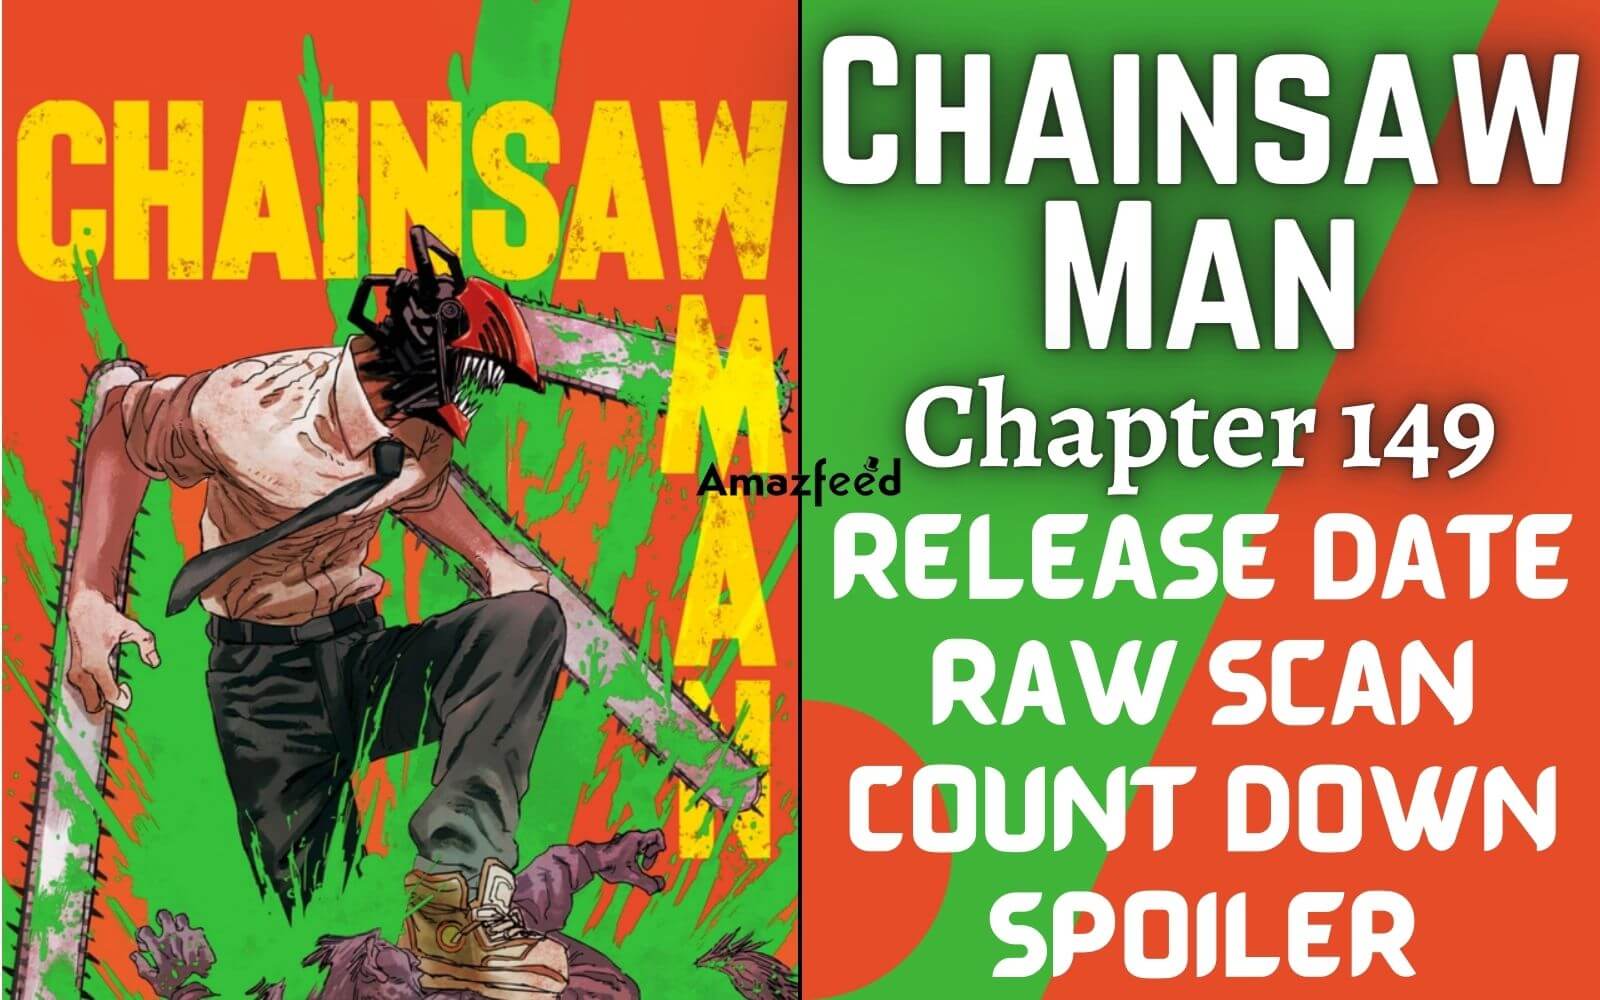 Chainsaw Man Season 2 Episode 1 Release Date and Time, COUNTDOWN